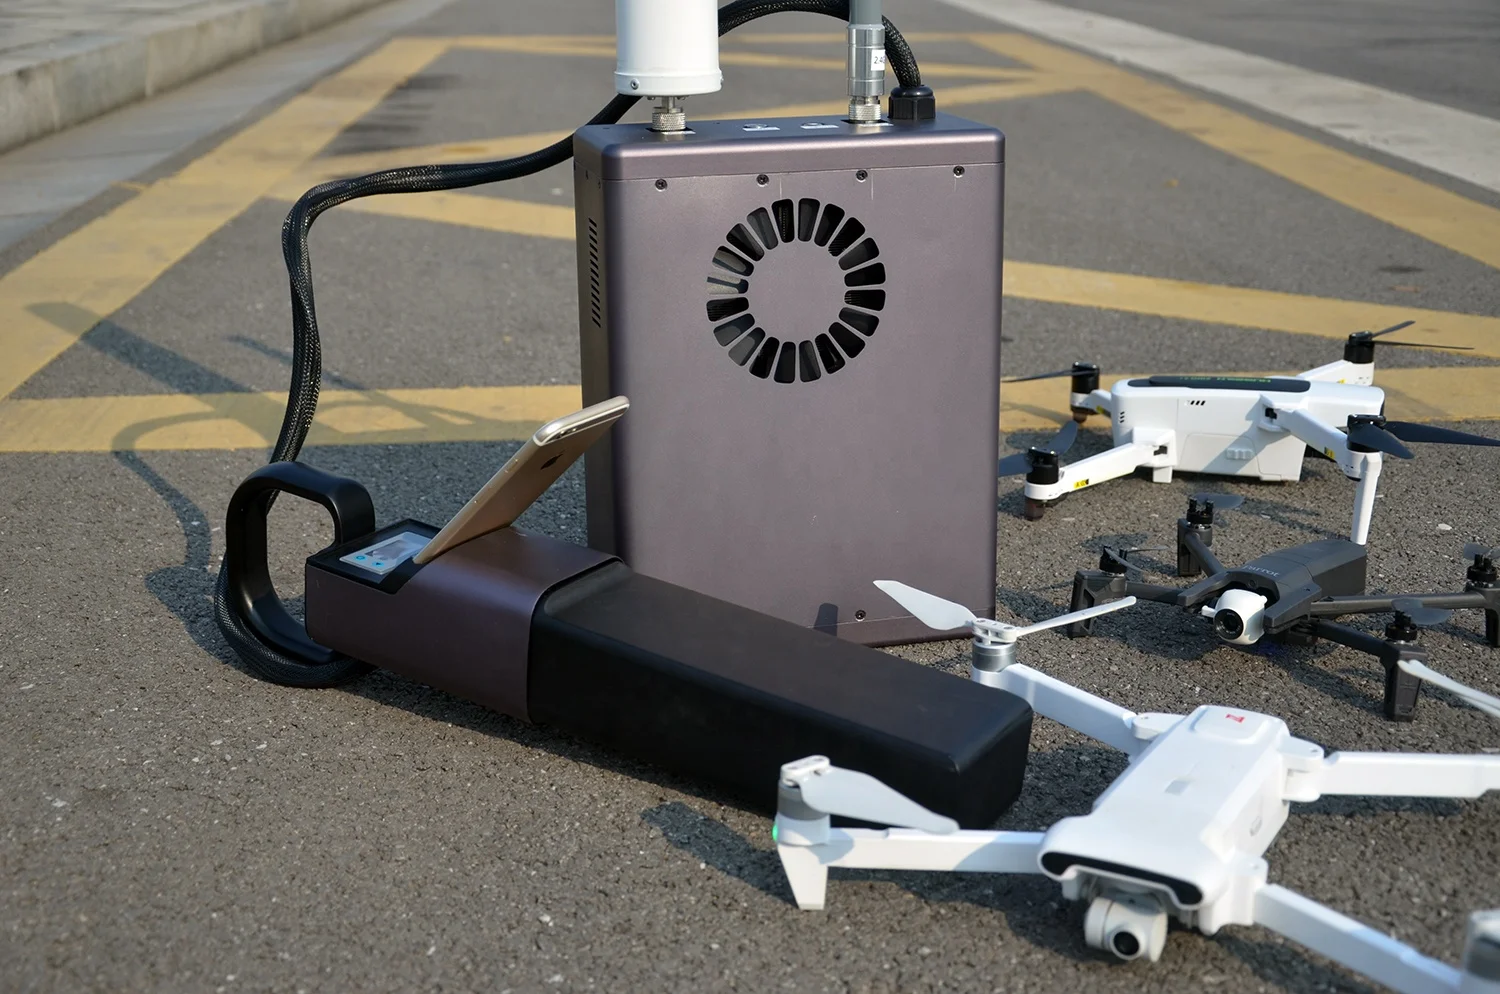 Drone detector jammer all in one up to 2.5km omni-directional Jammer Anti Drone System for VIP